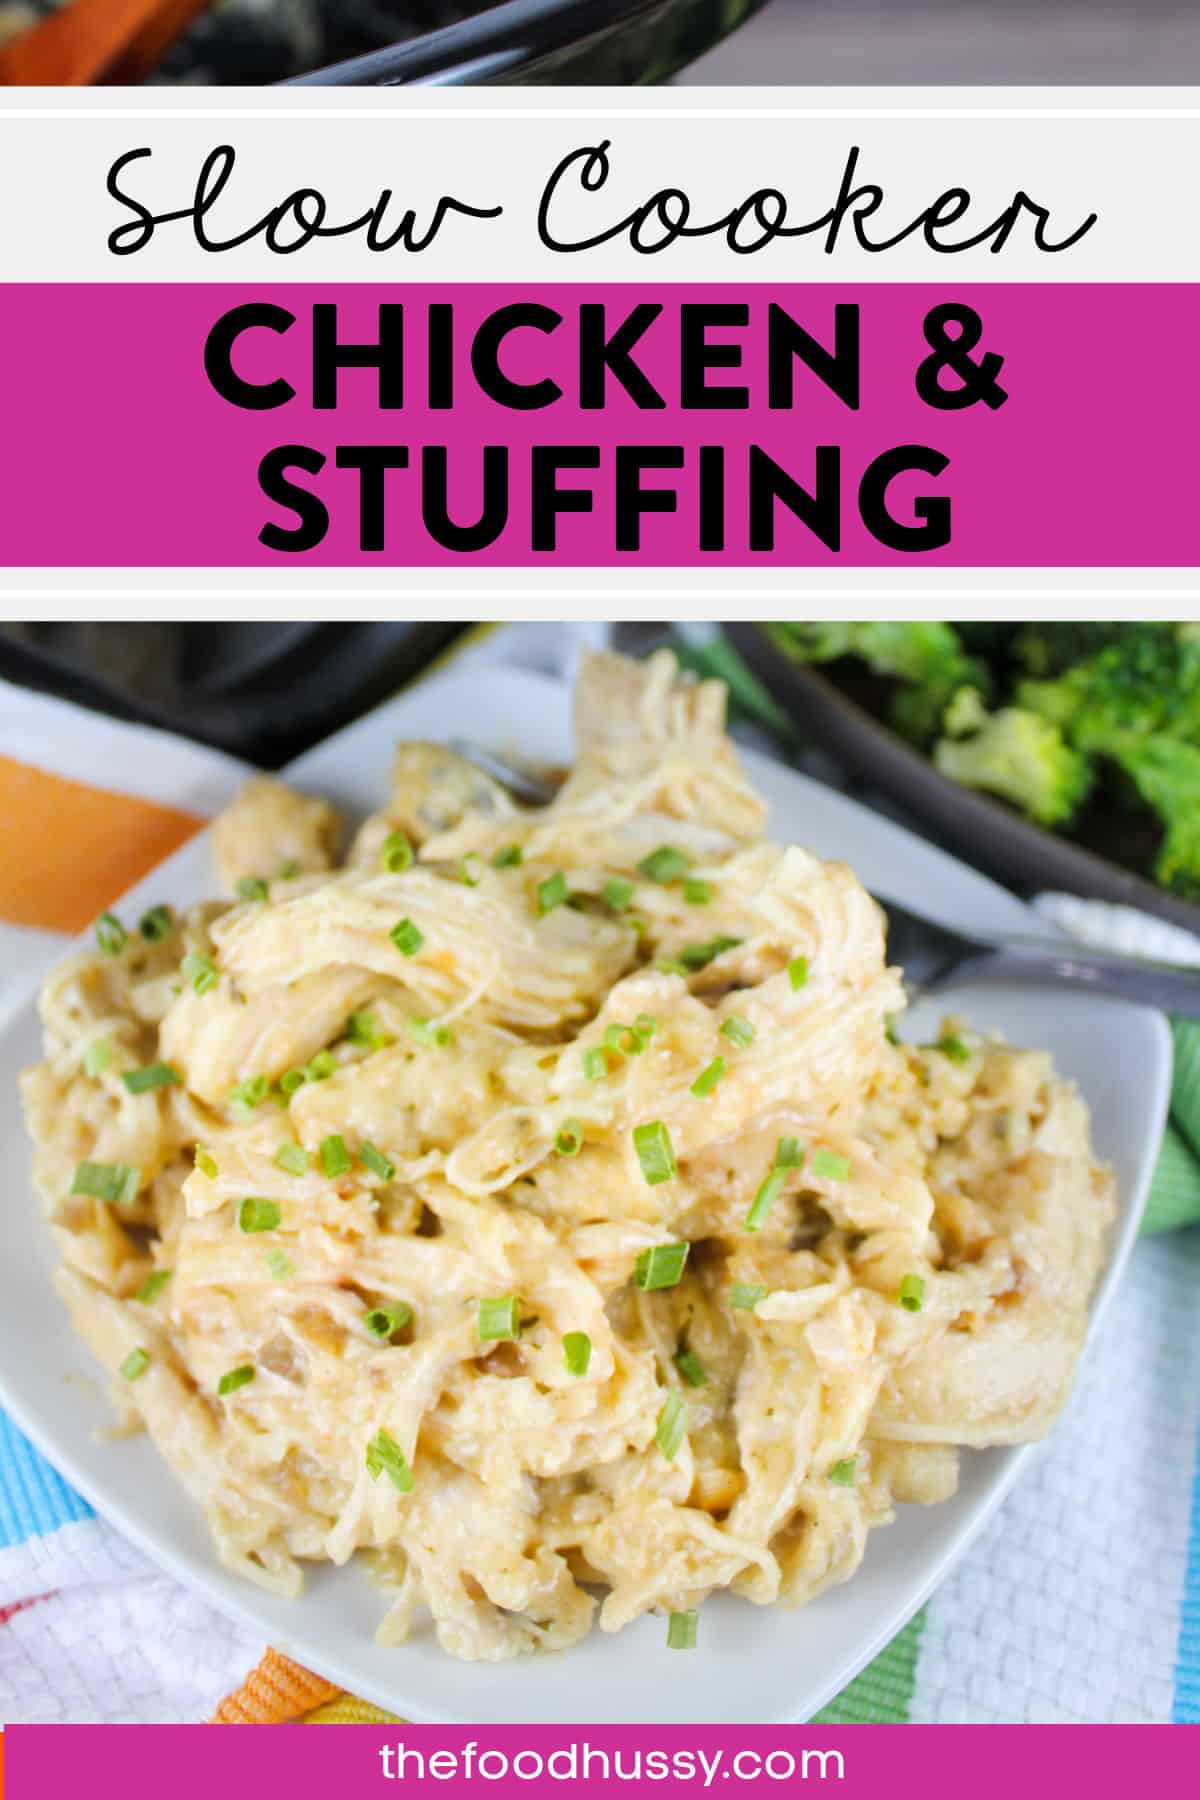 Four Ingredient Slow Cooker Chicken & Stuffing is a great meal for any busy weeknight. One of those set it and forget it meals with shredded chicken, stuffing and a creamy delicious gravy!   via @foodhussy